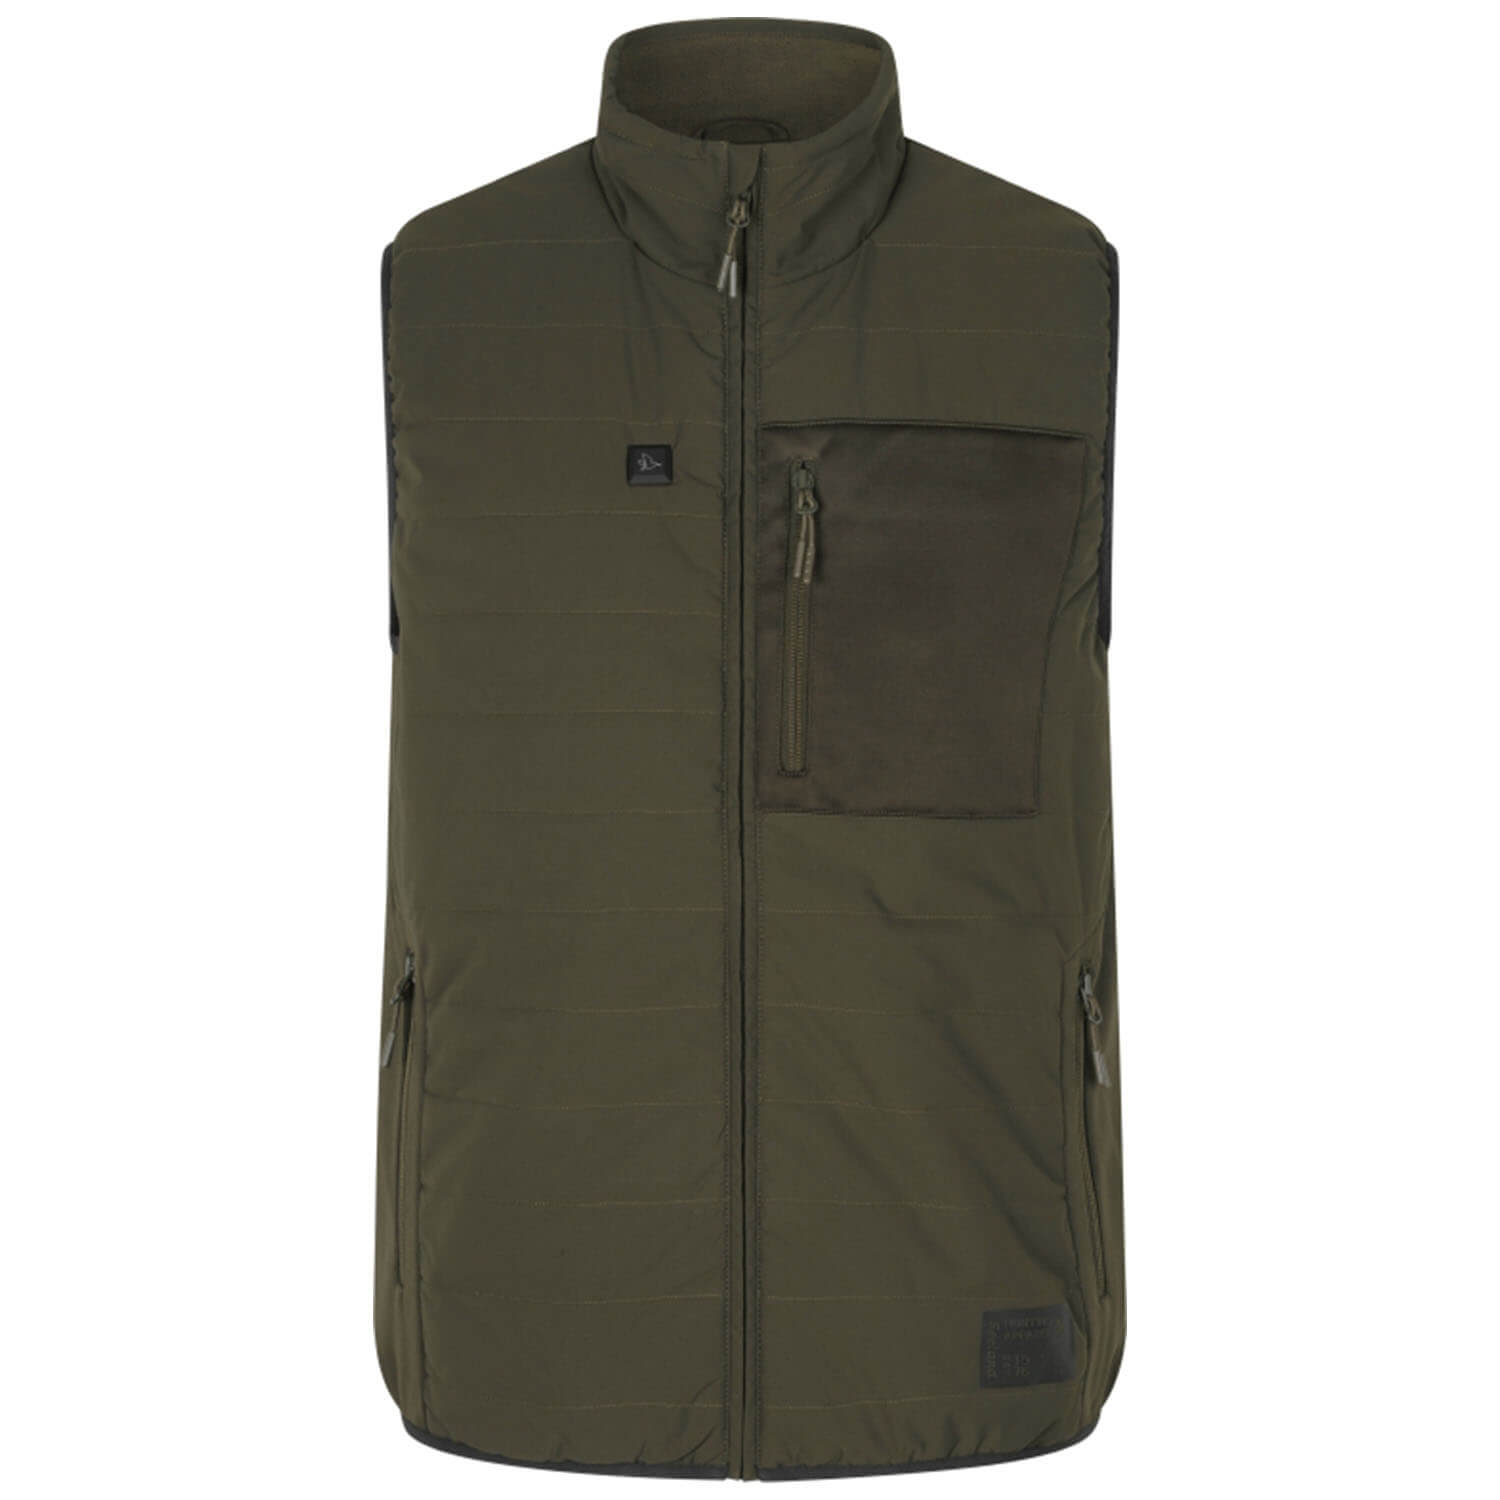 Seeland heat vest celsius (Pine Green) - Heated Clothing